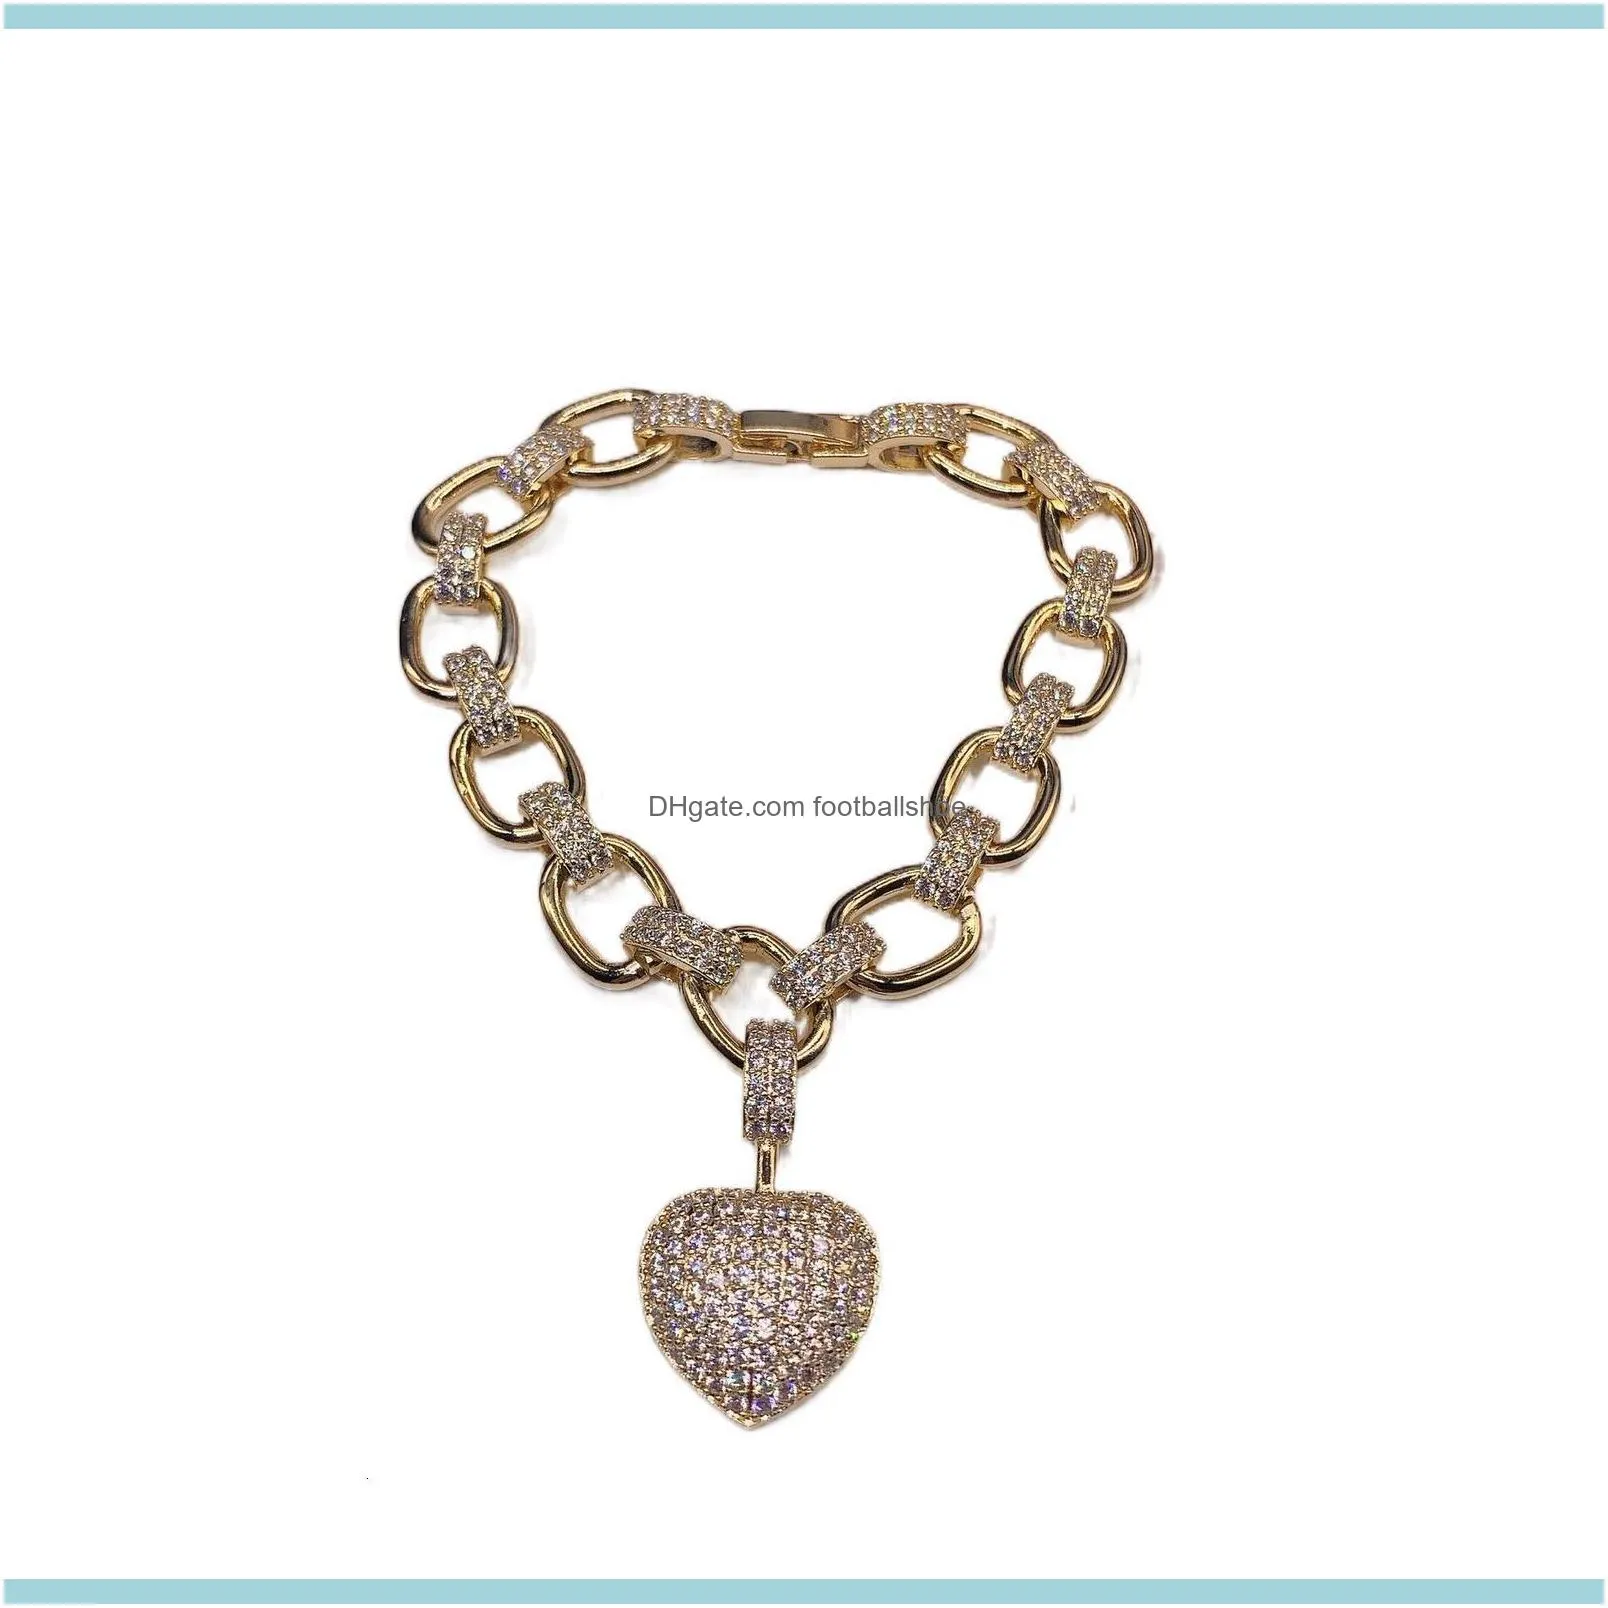 FactoryM9M1micro exaggerated simple atmosphere Ins inlaid big fashion peach heart lock necklace bracelet